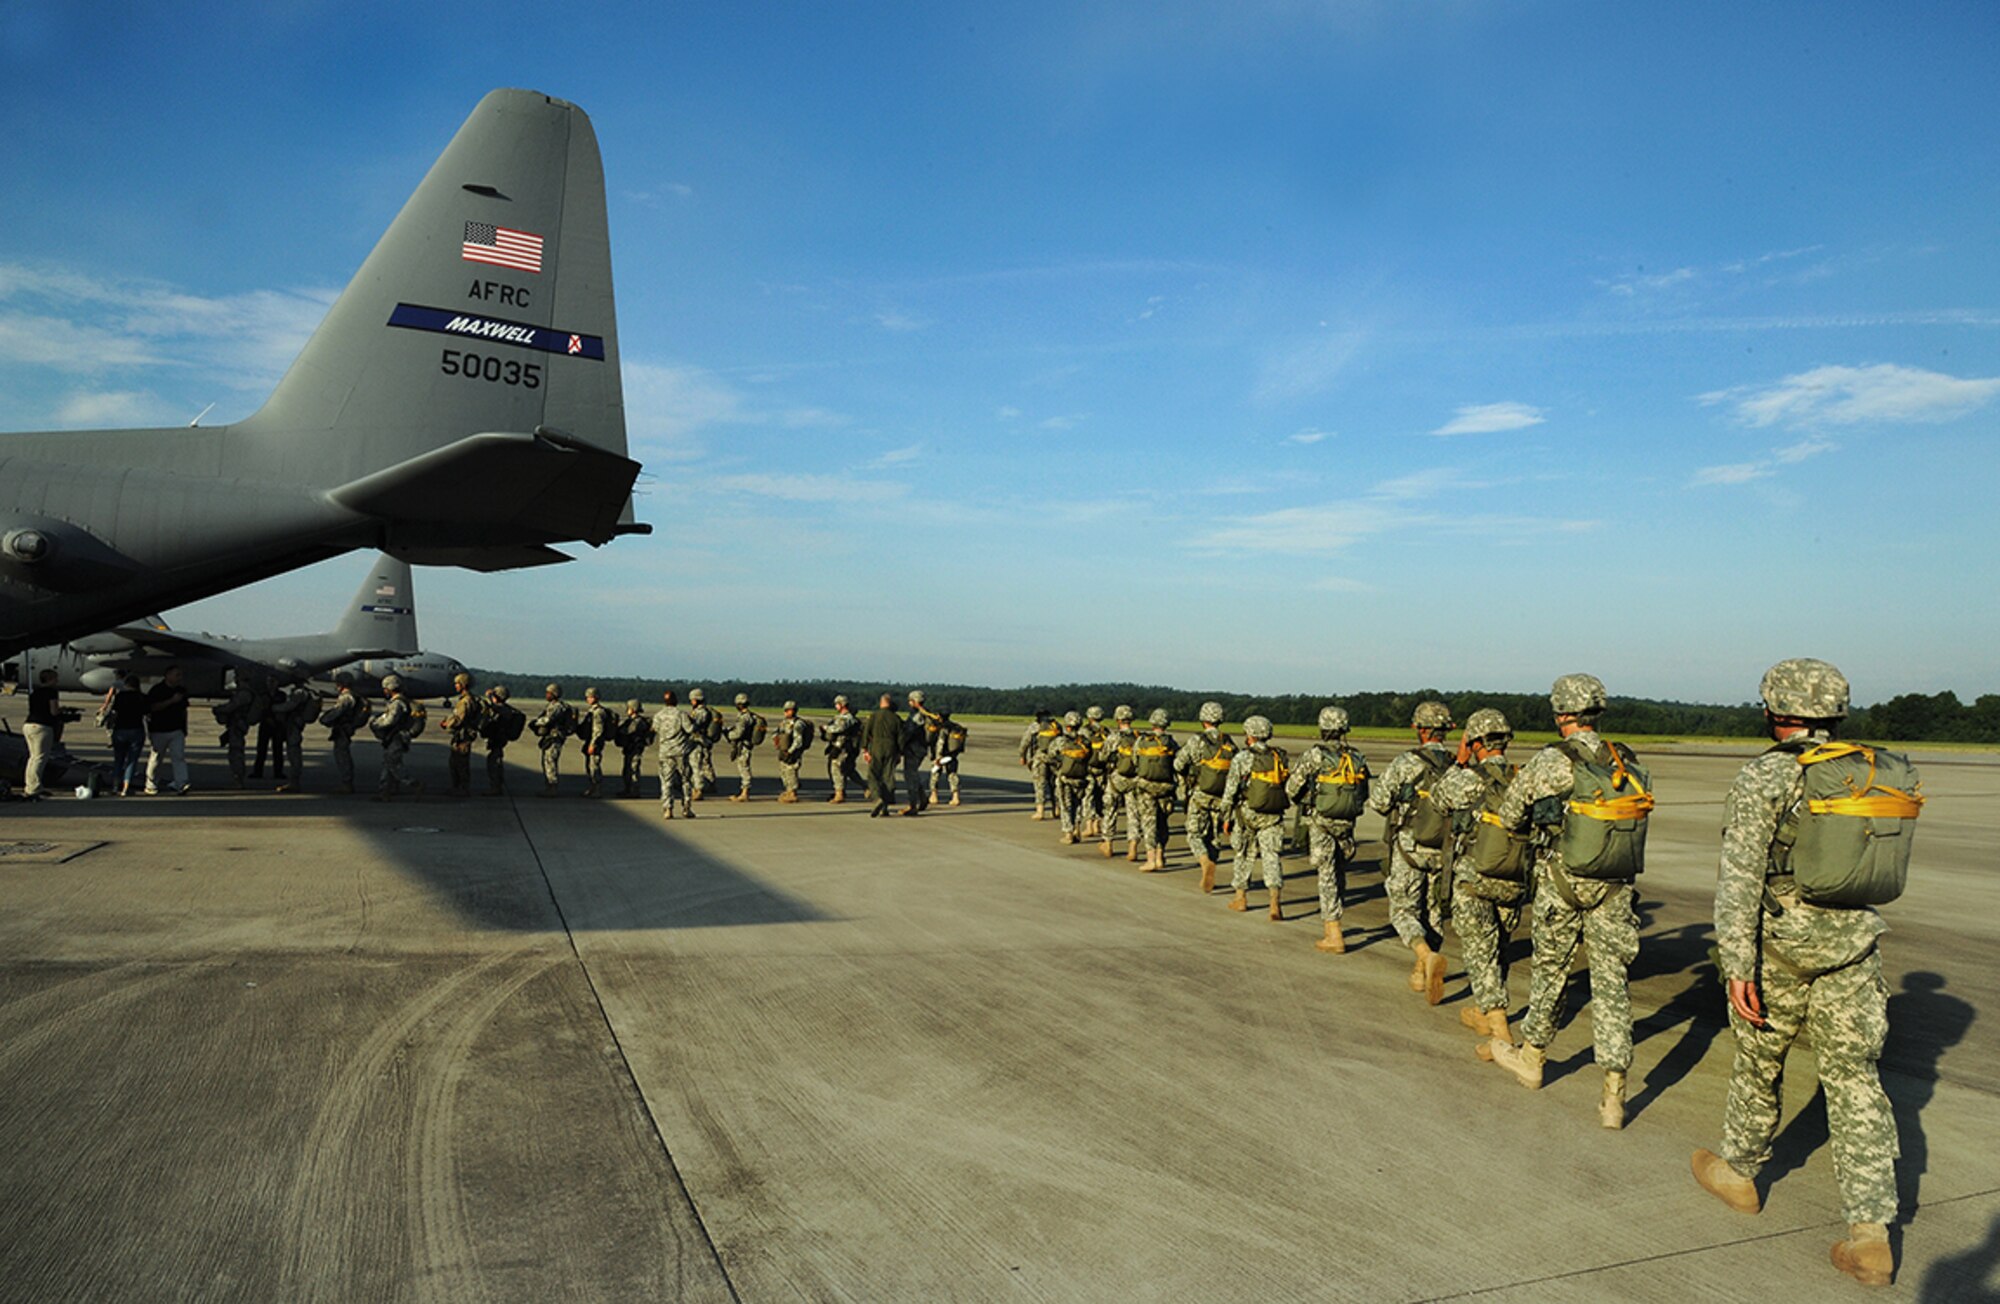 Army and Marine paratroopers taking part in the airborne anniversary jump board the 908th C-130. (photo by Lt. Col. Jerry Lobb)